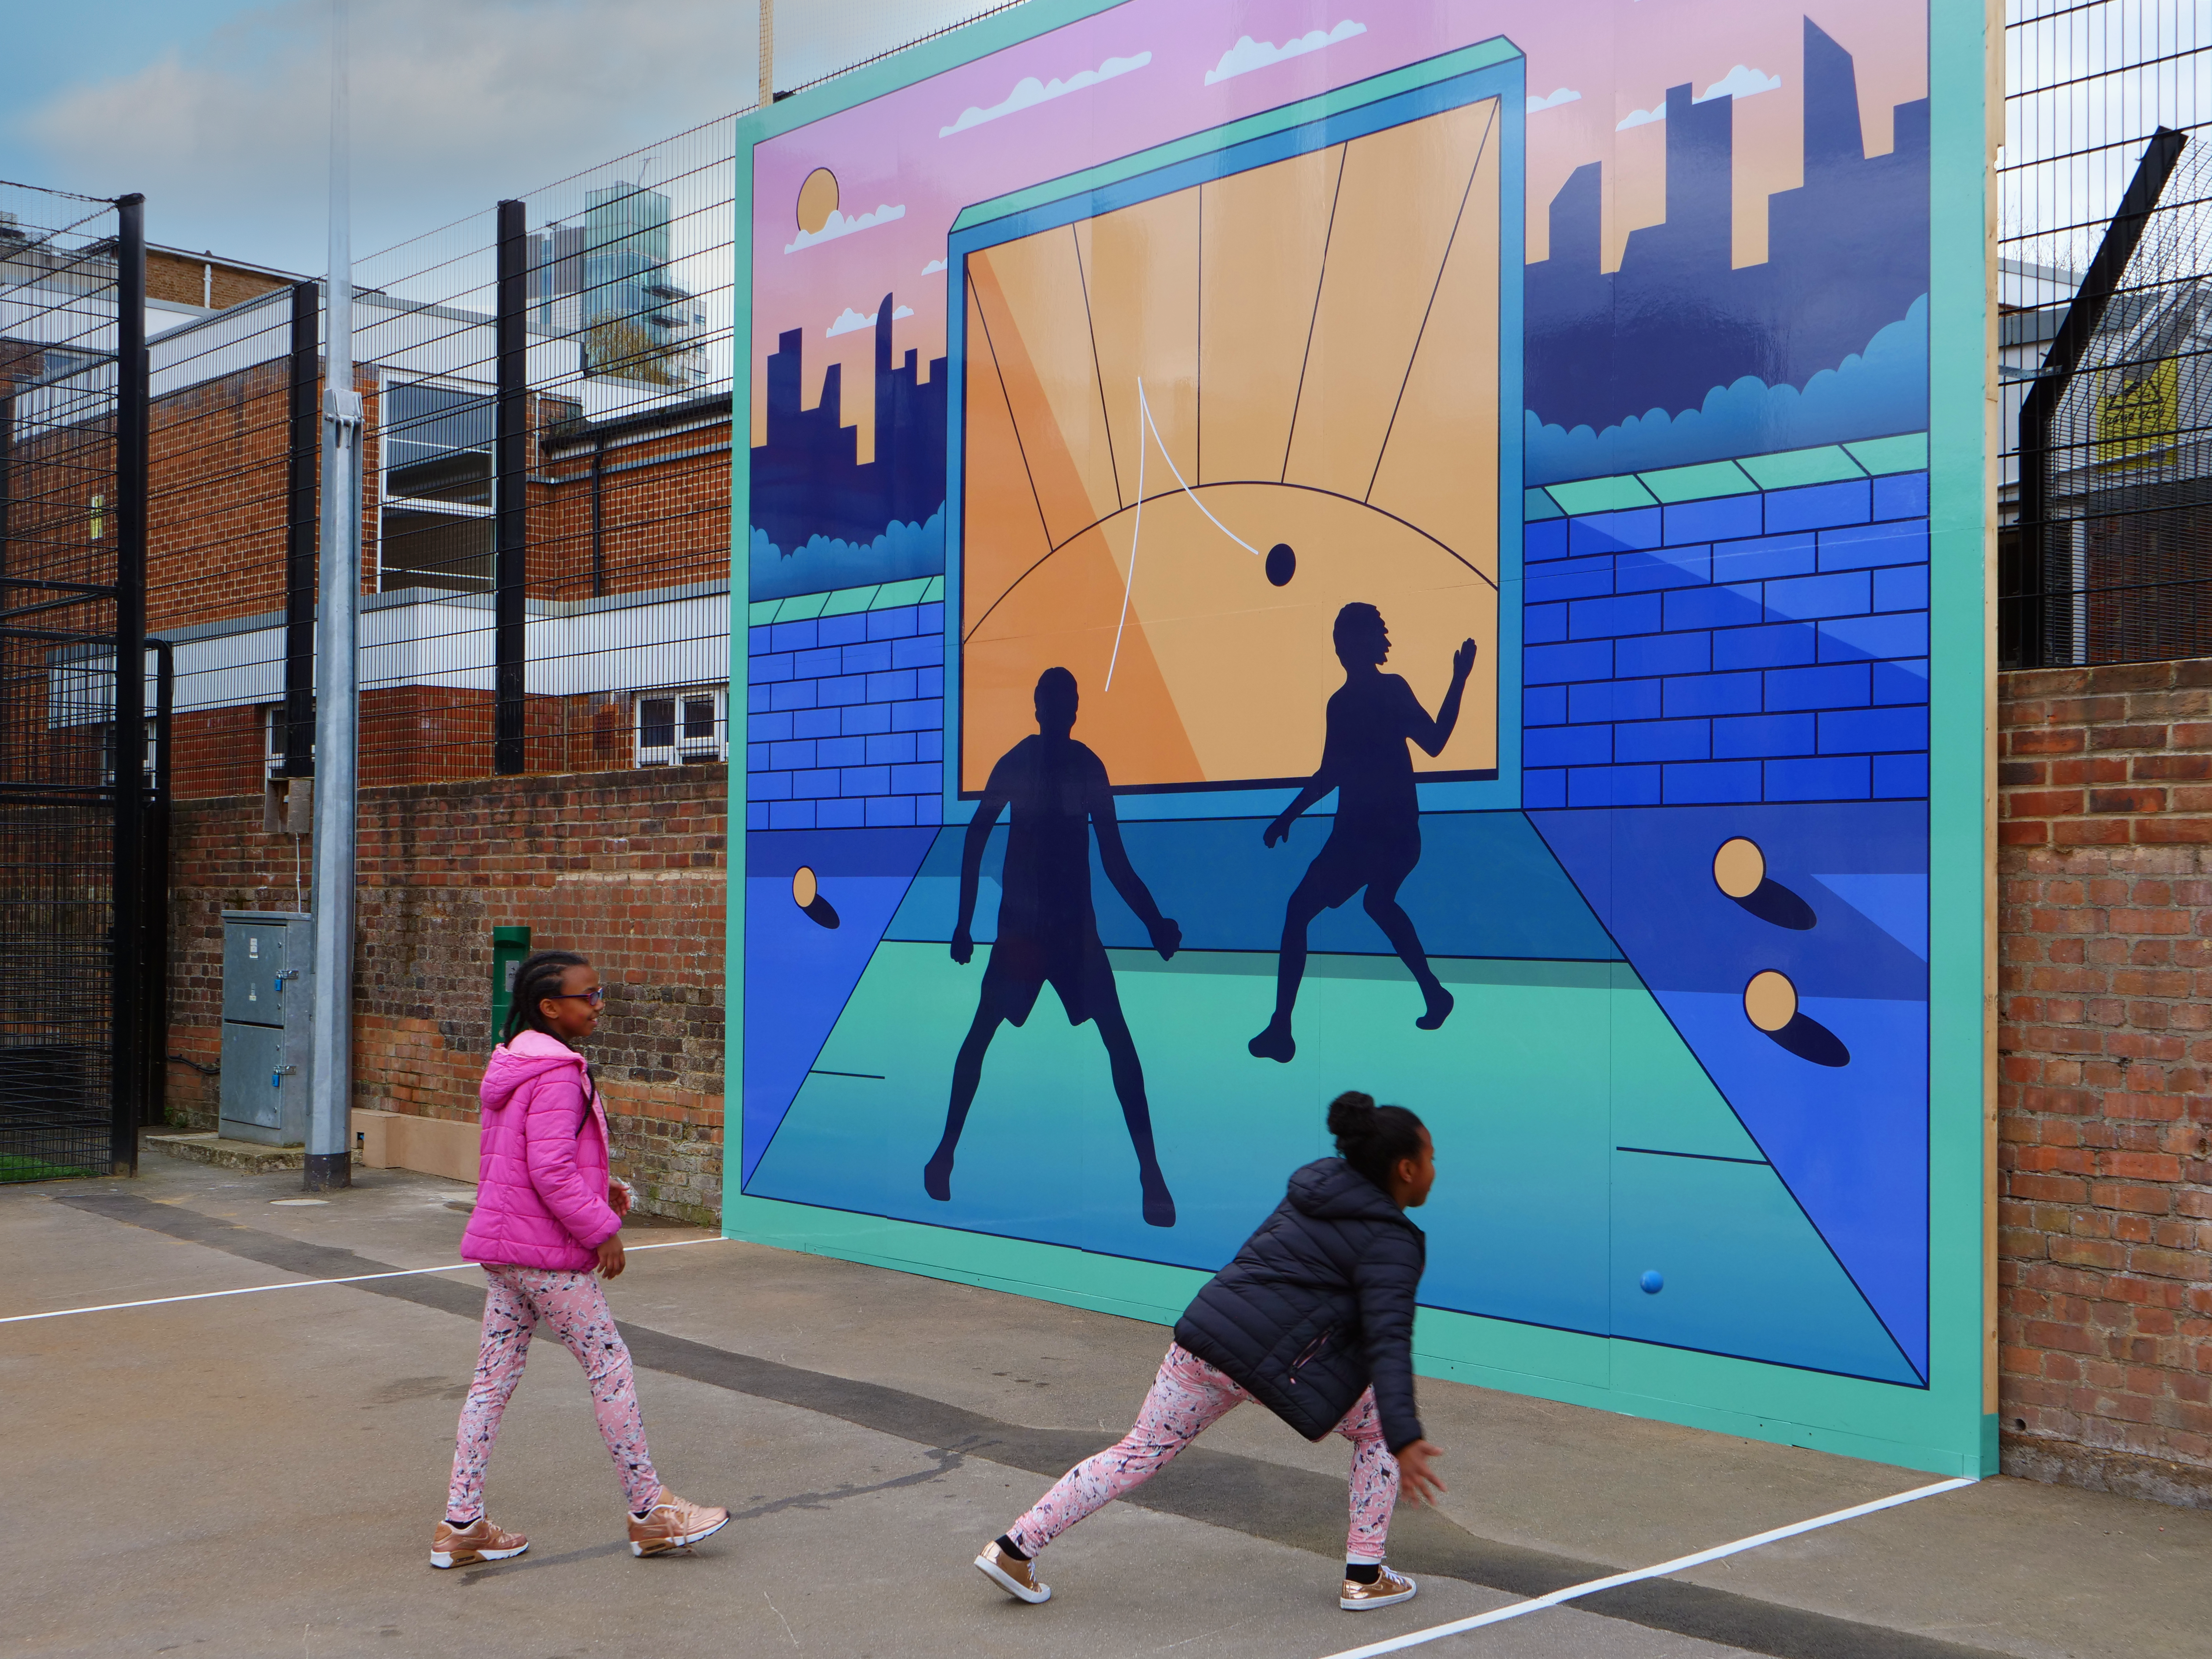 UK’s first ever Community Wallball Court Opened in Southwark